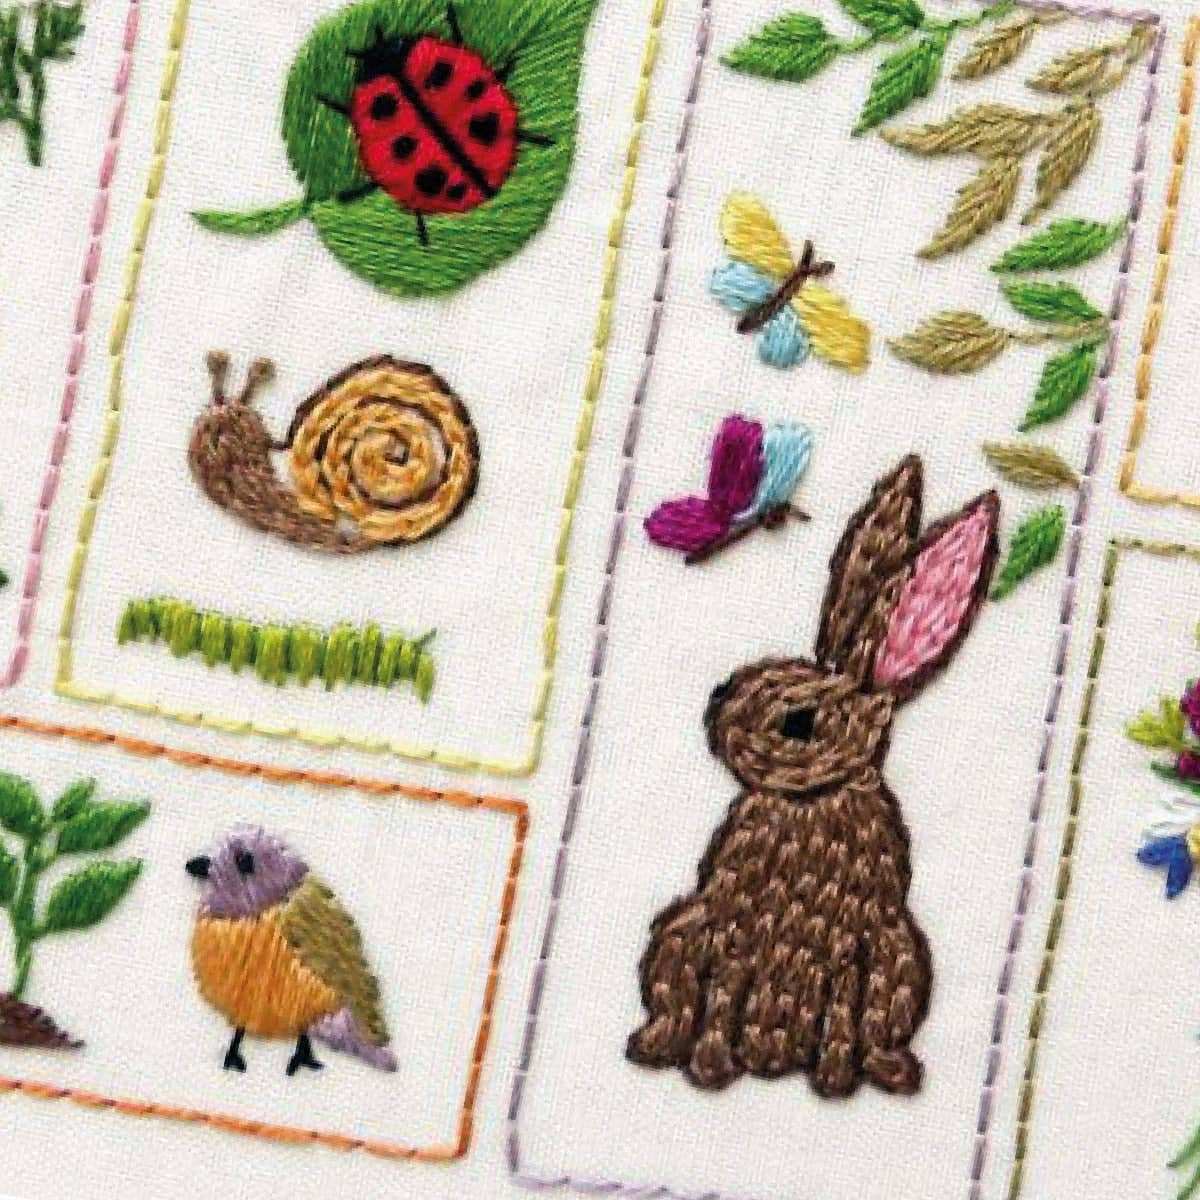 Spring Splendour Pre Printed Embroidery Fabric Panel , Pre Printed Fabric Pattern , StitchDoodles , bird embroidery, birds summer pattern, embroidery hoop kit, embroidery kit for adults, embroidery kit for beginers, flower embroidery, hand embroidery, hand embroidery pattern, Printed Pattern, spring embroidery pattern, spring splendour , StitchDoodles , shop.stitchdoodles.com